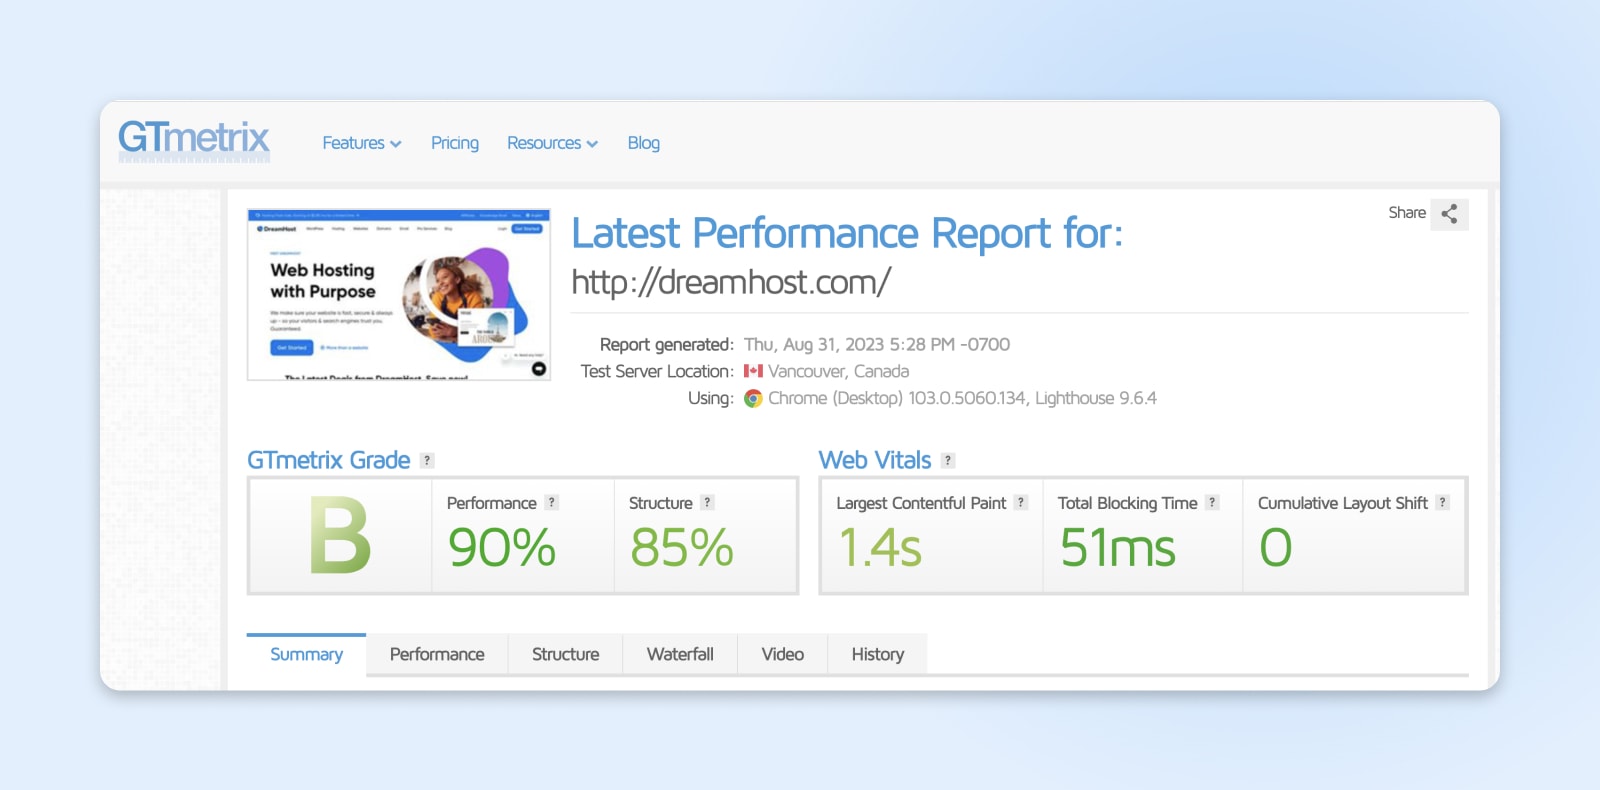 How To Supercharge Site Speed With GTmetrix - DreamHost